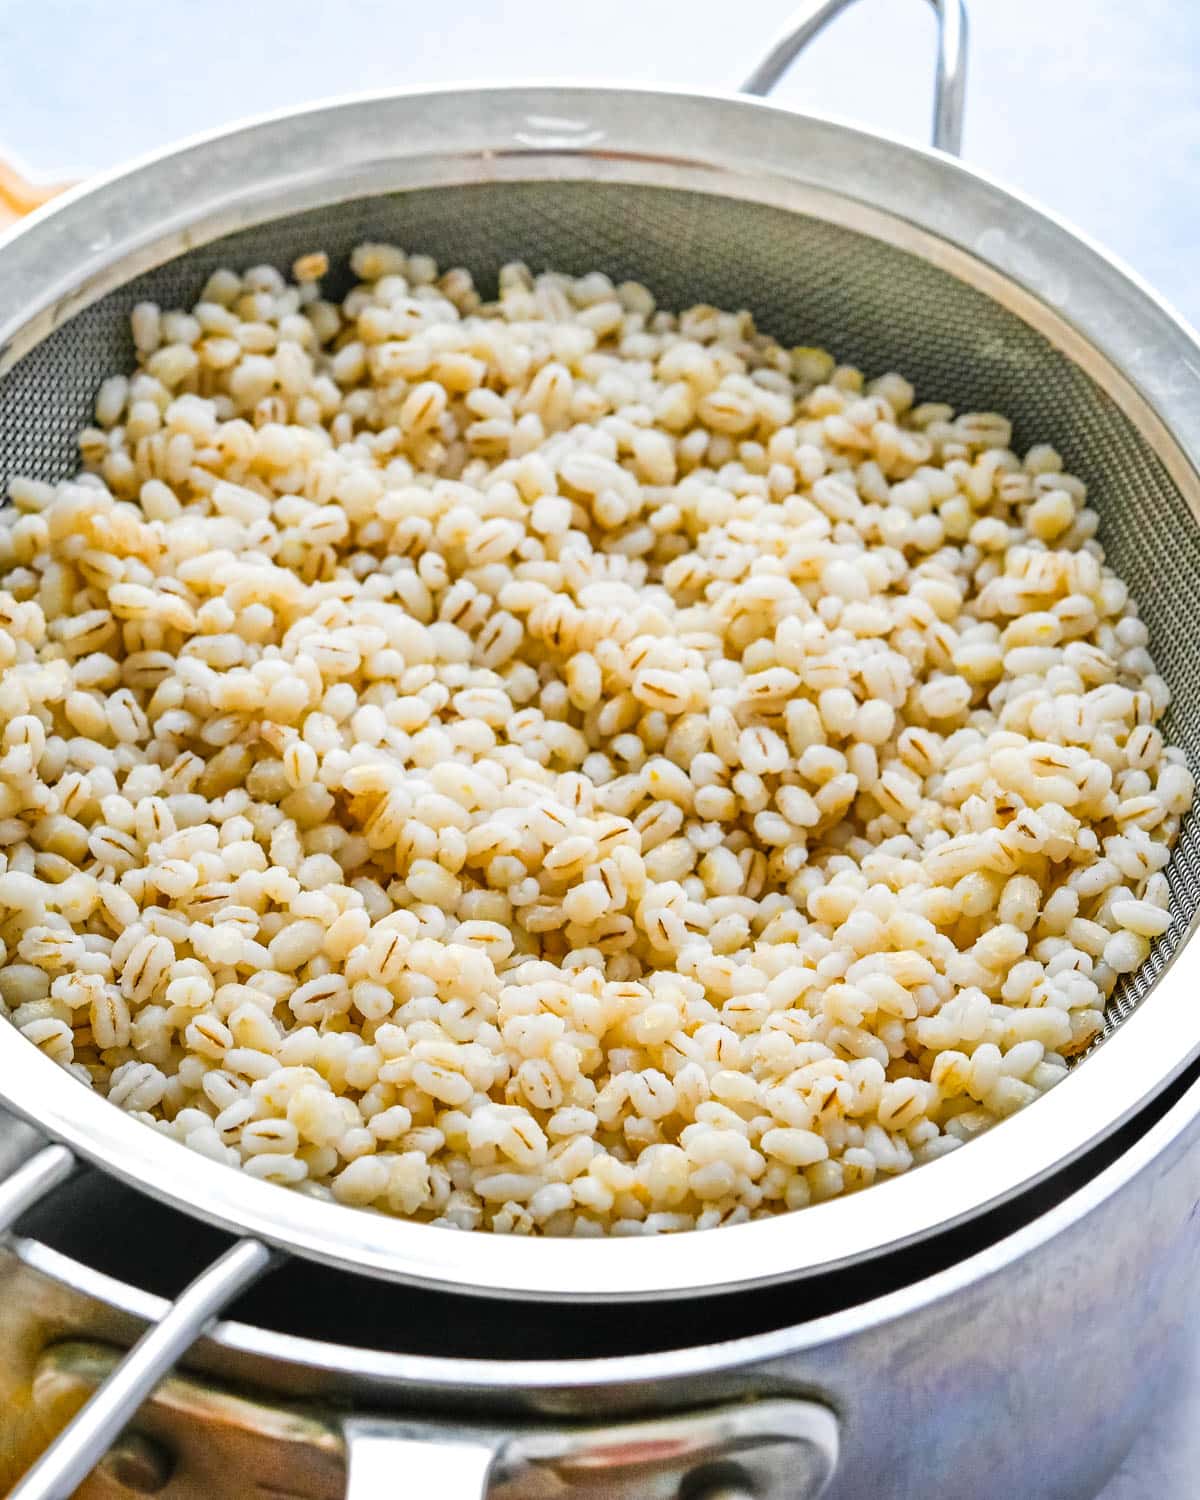 Cooked barley in a strainer.